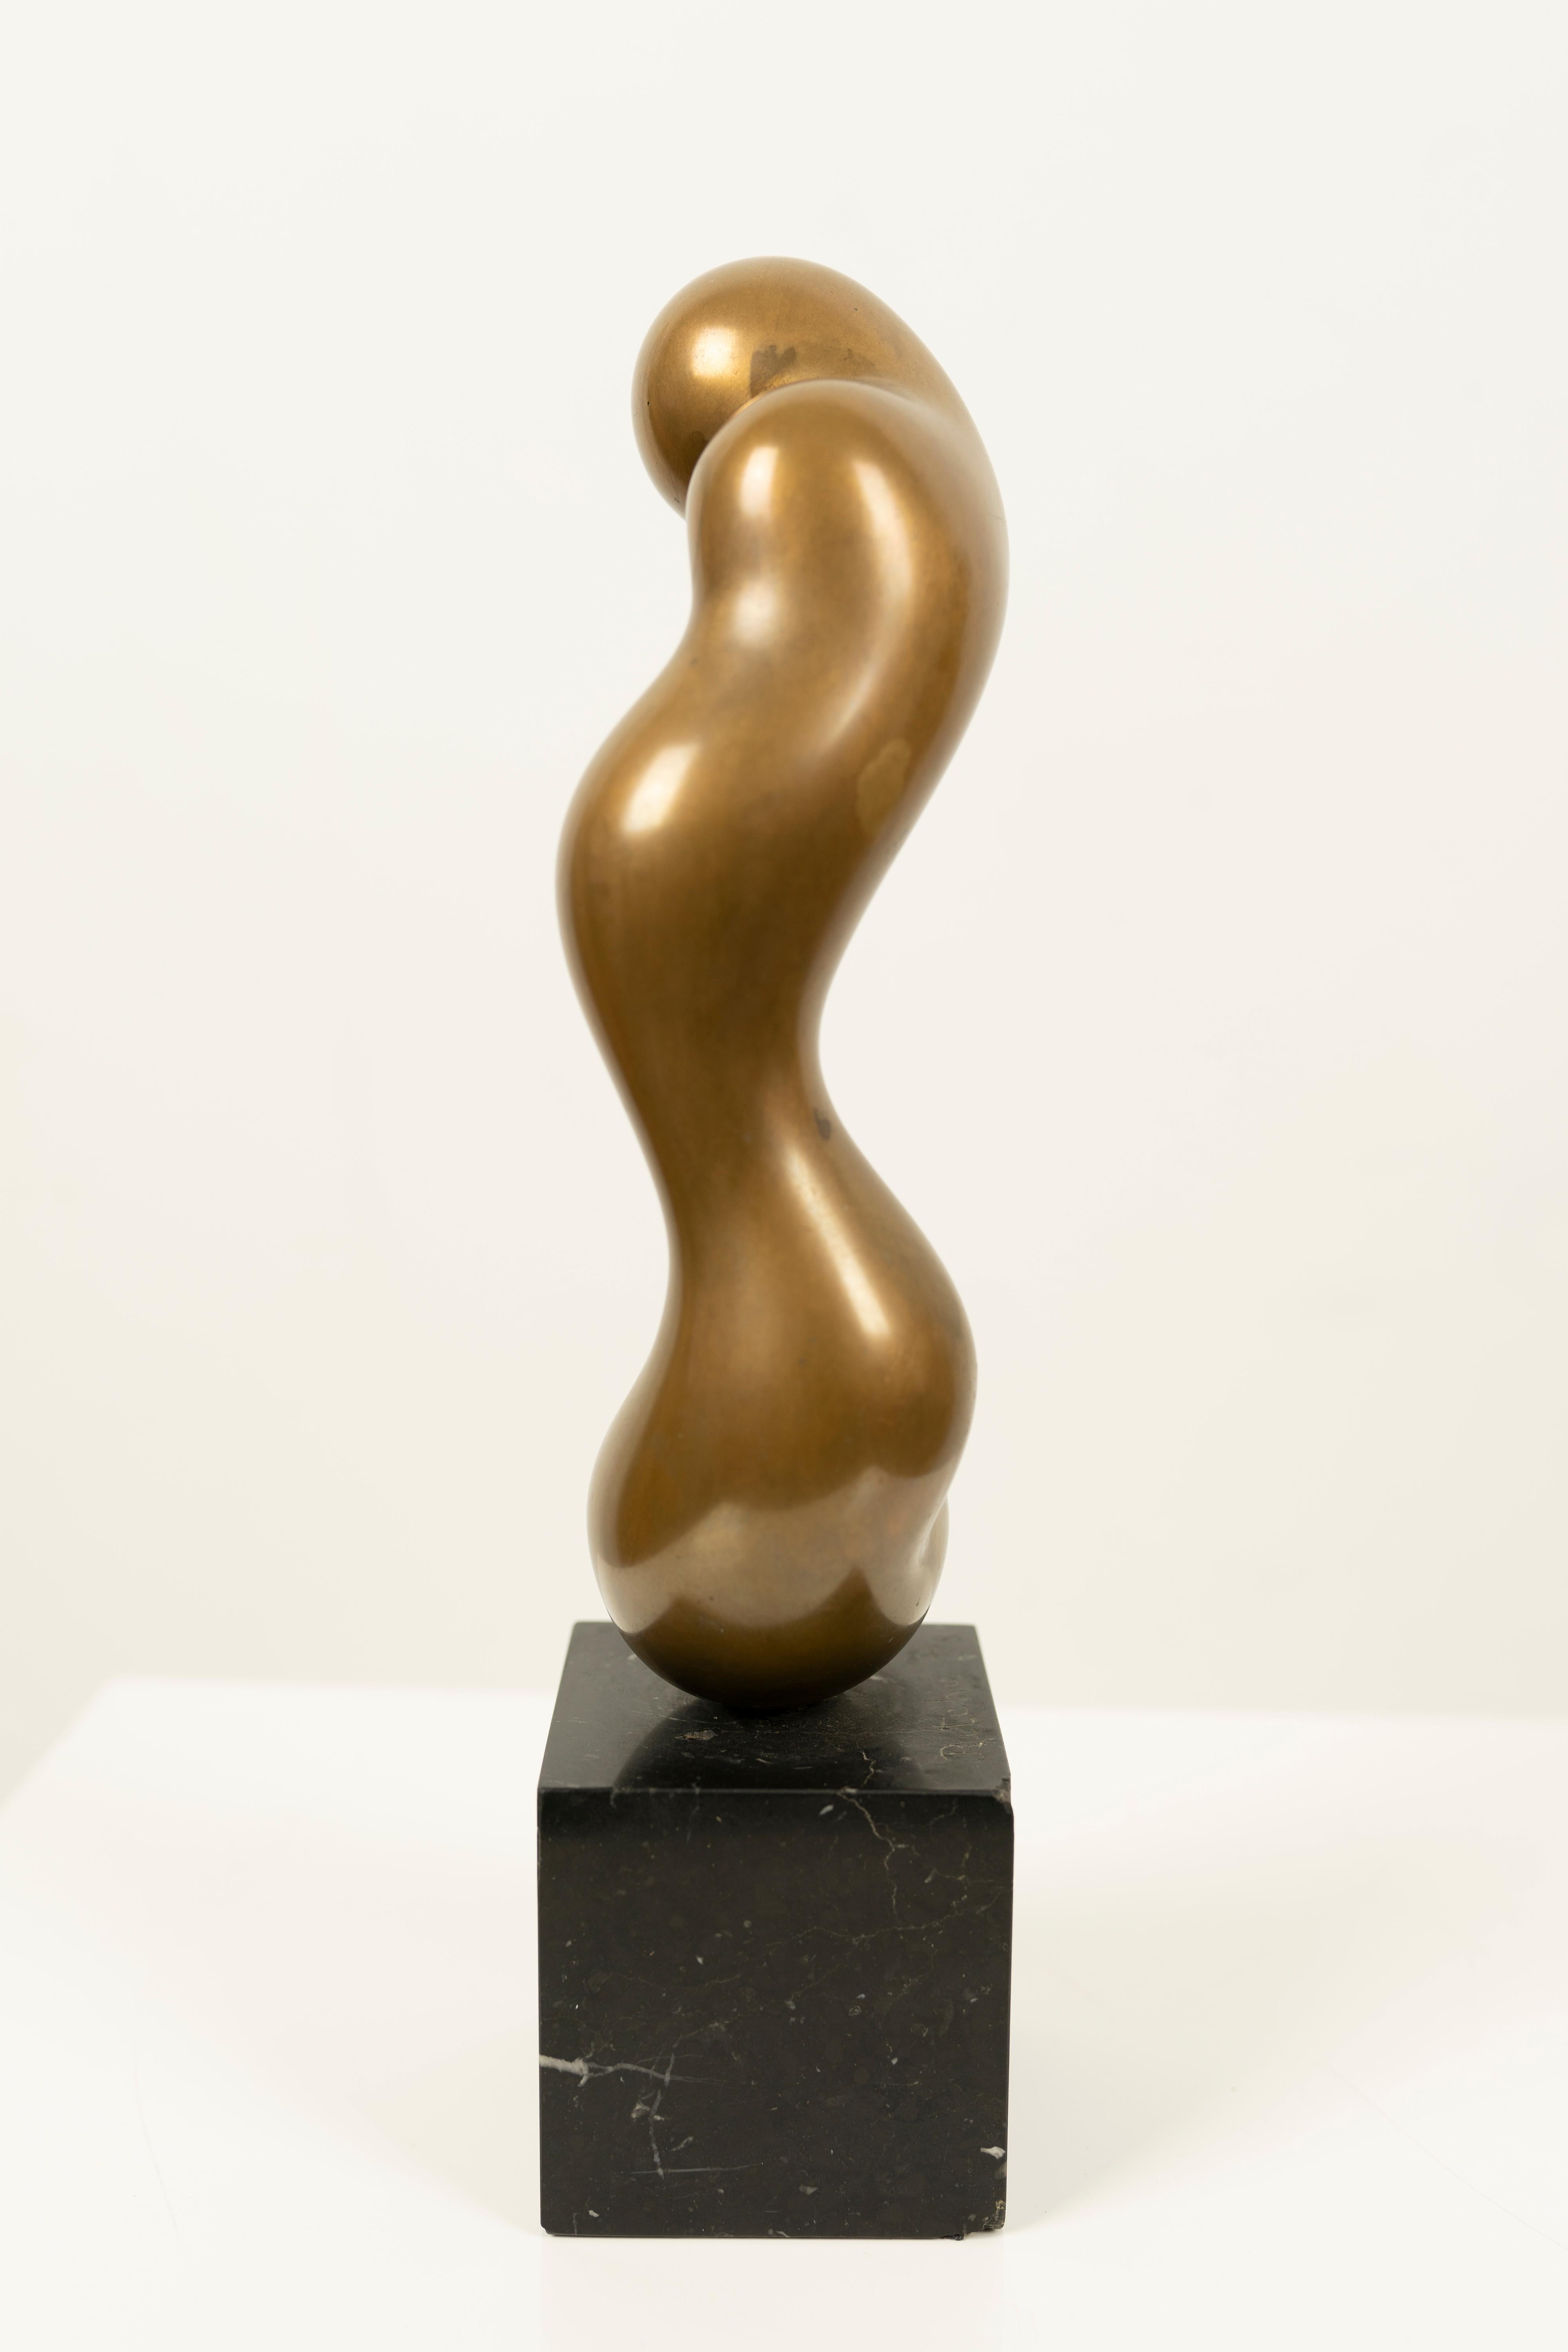 Figural Abstract Bronze Sculpture James Ritchie French Canadian Modernist  - Gold Figurative Sculpture by Jim Ritchie